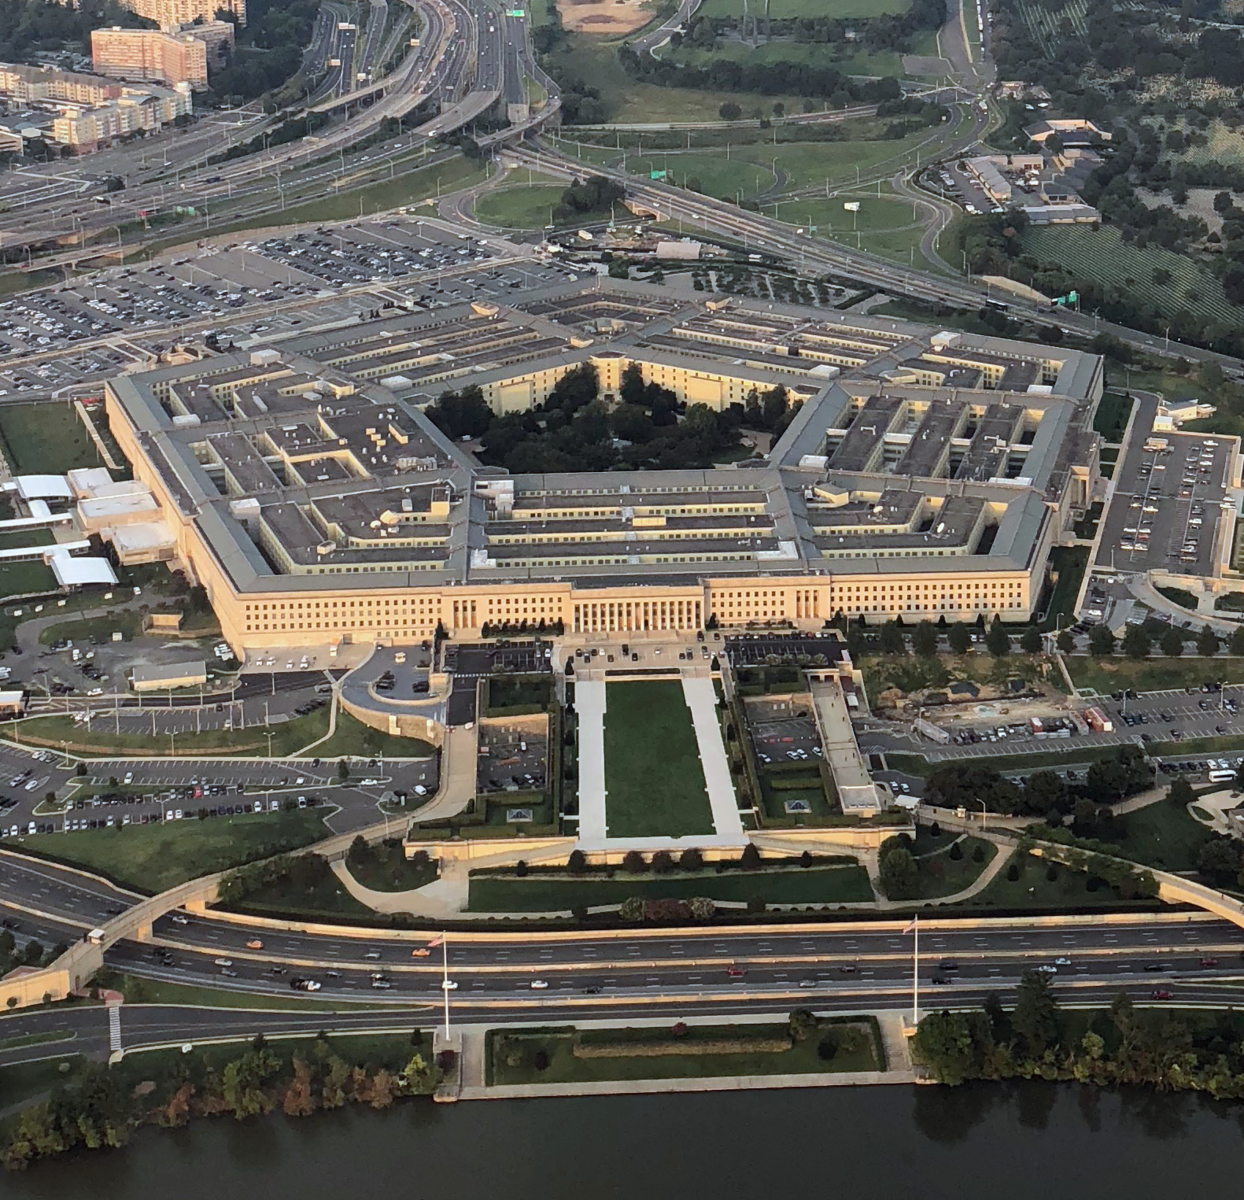 Fake AI image appears to show explosion near Pentagon